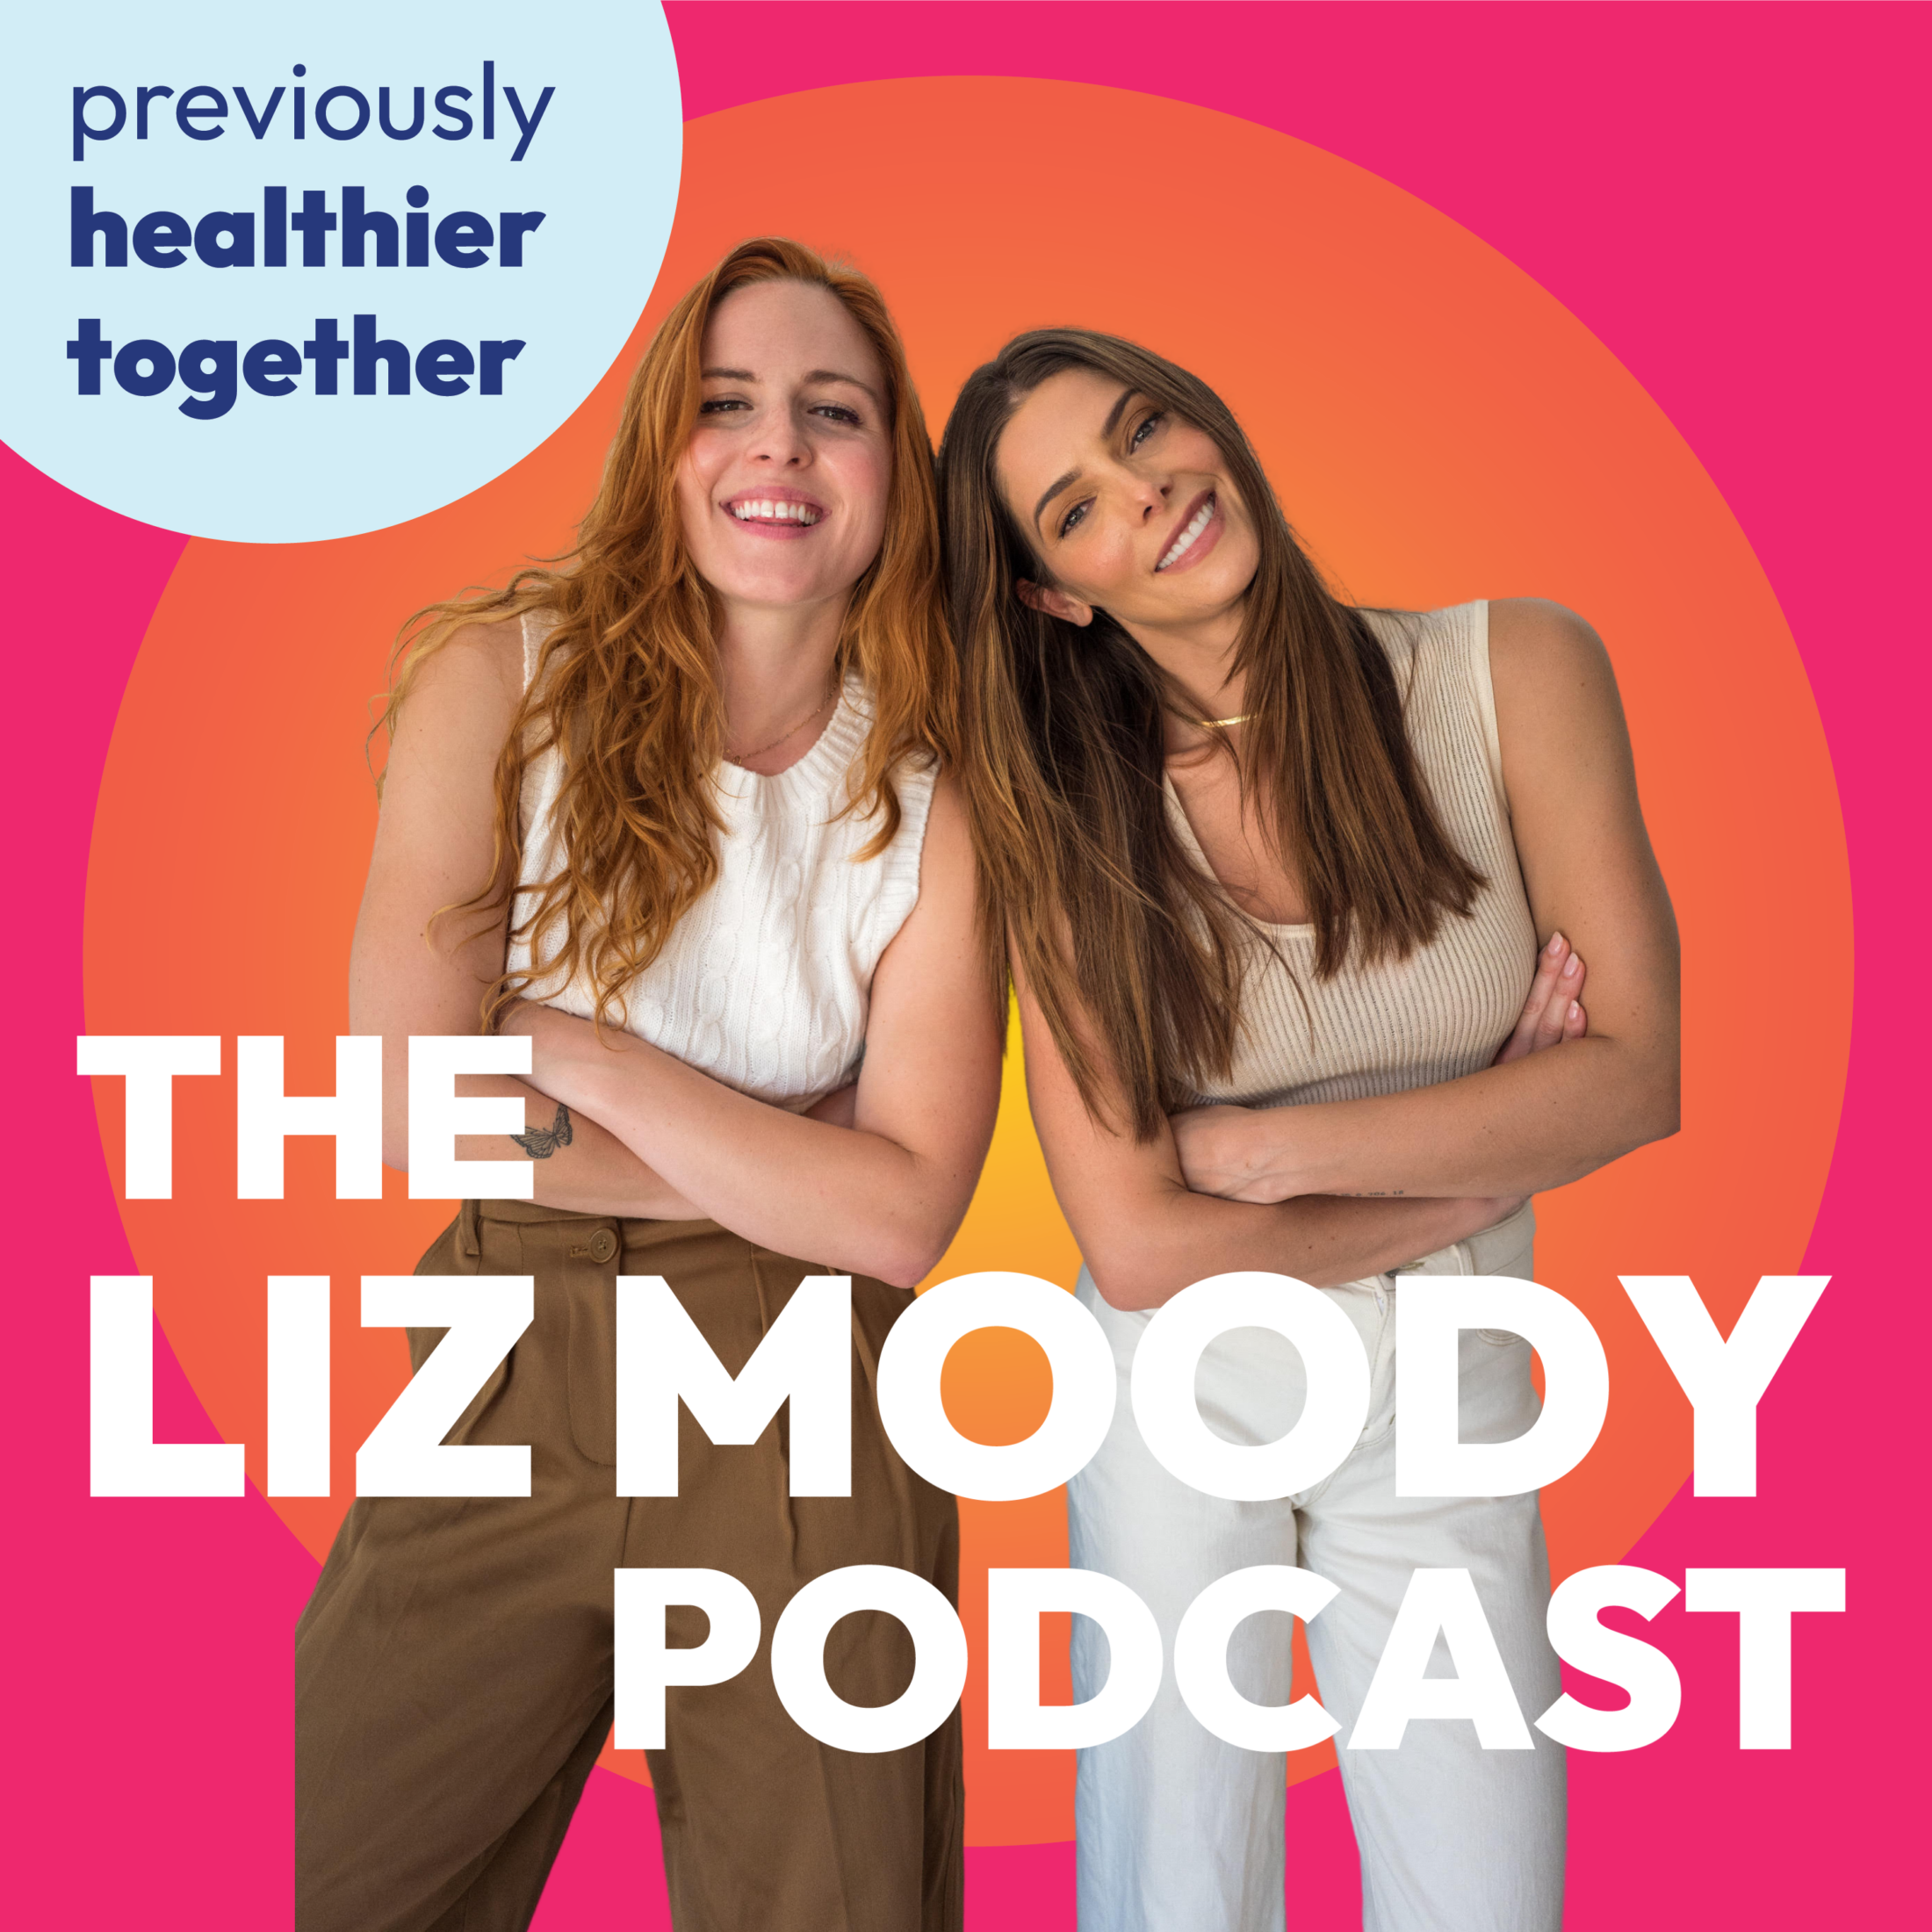 Actress Ashley Greene & Olivia Khoury On PMDD, Cycle Syncing, & How To Understand Your Hormones To Transform Your Health